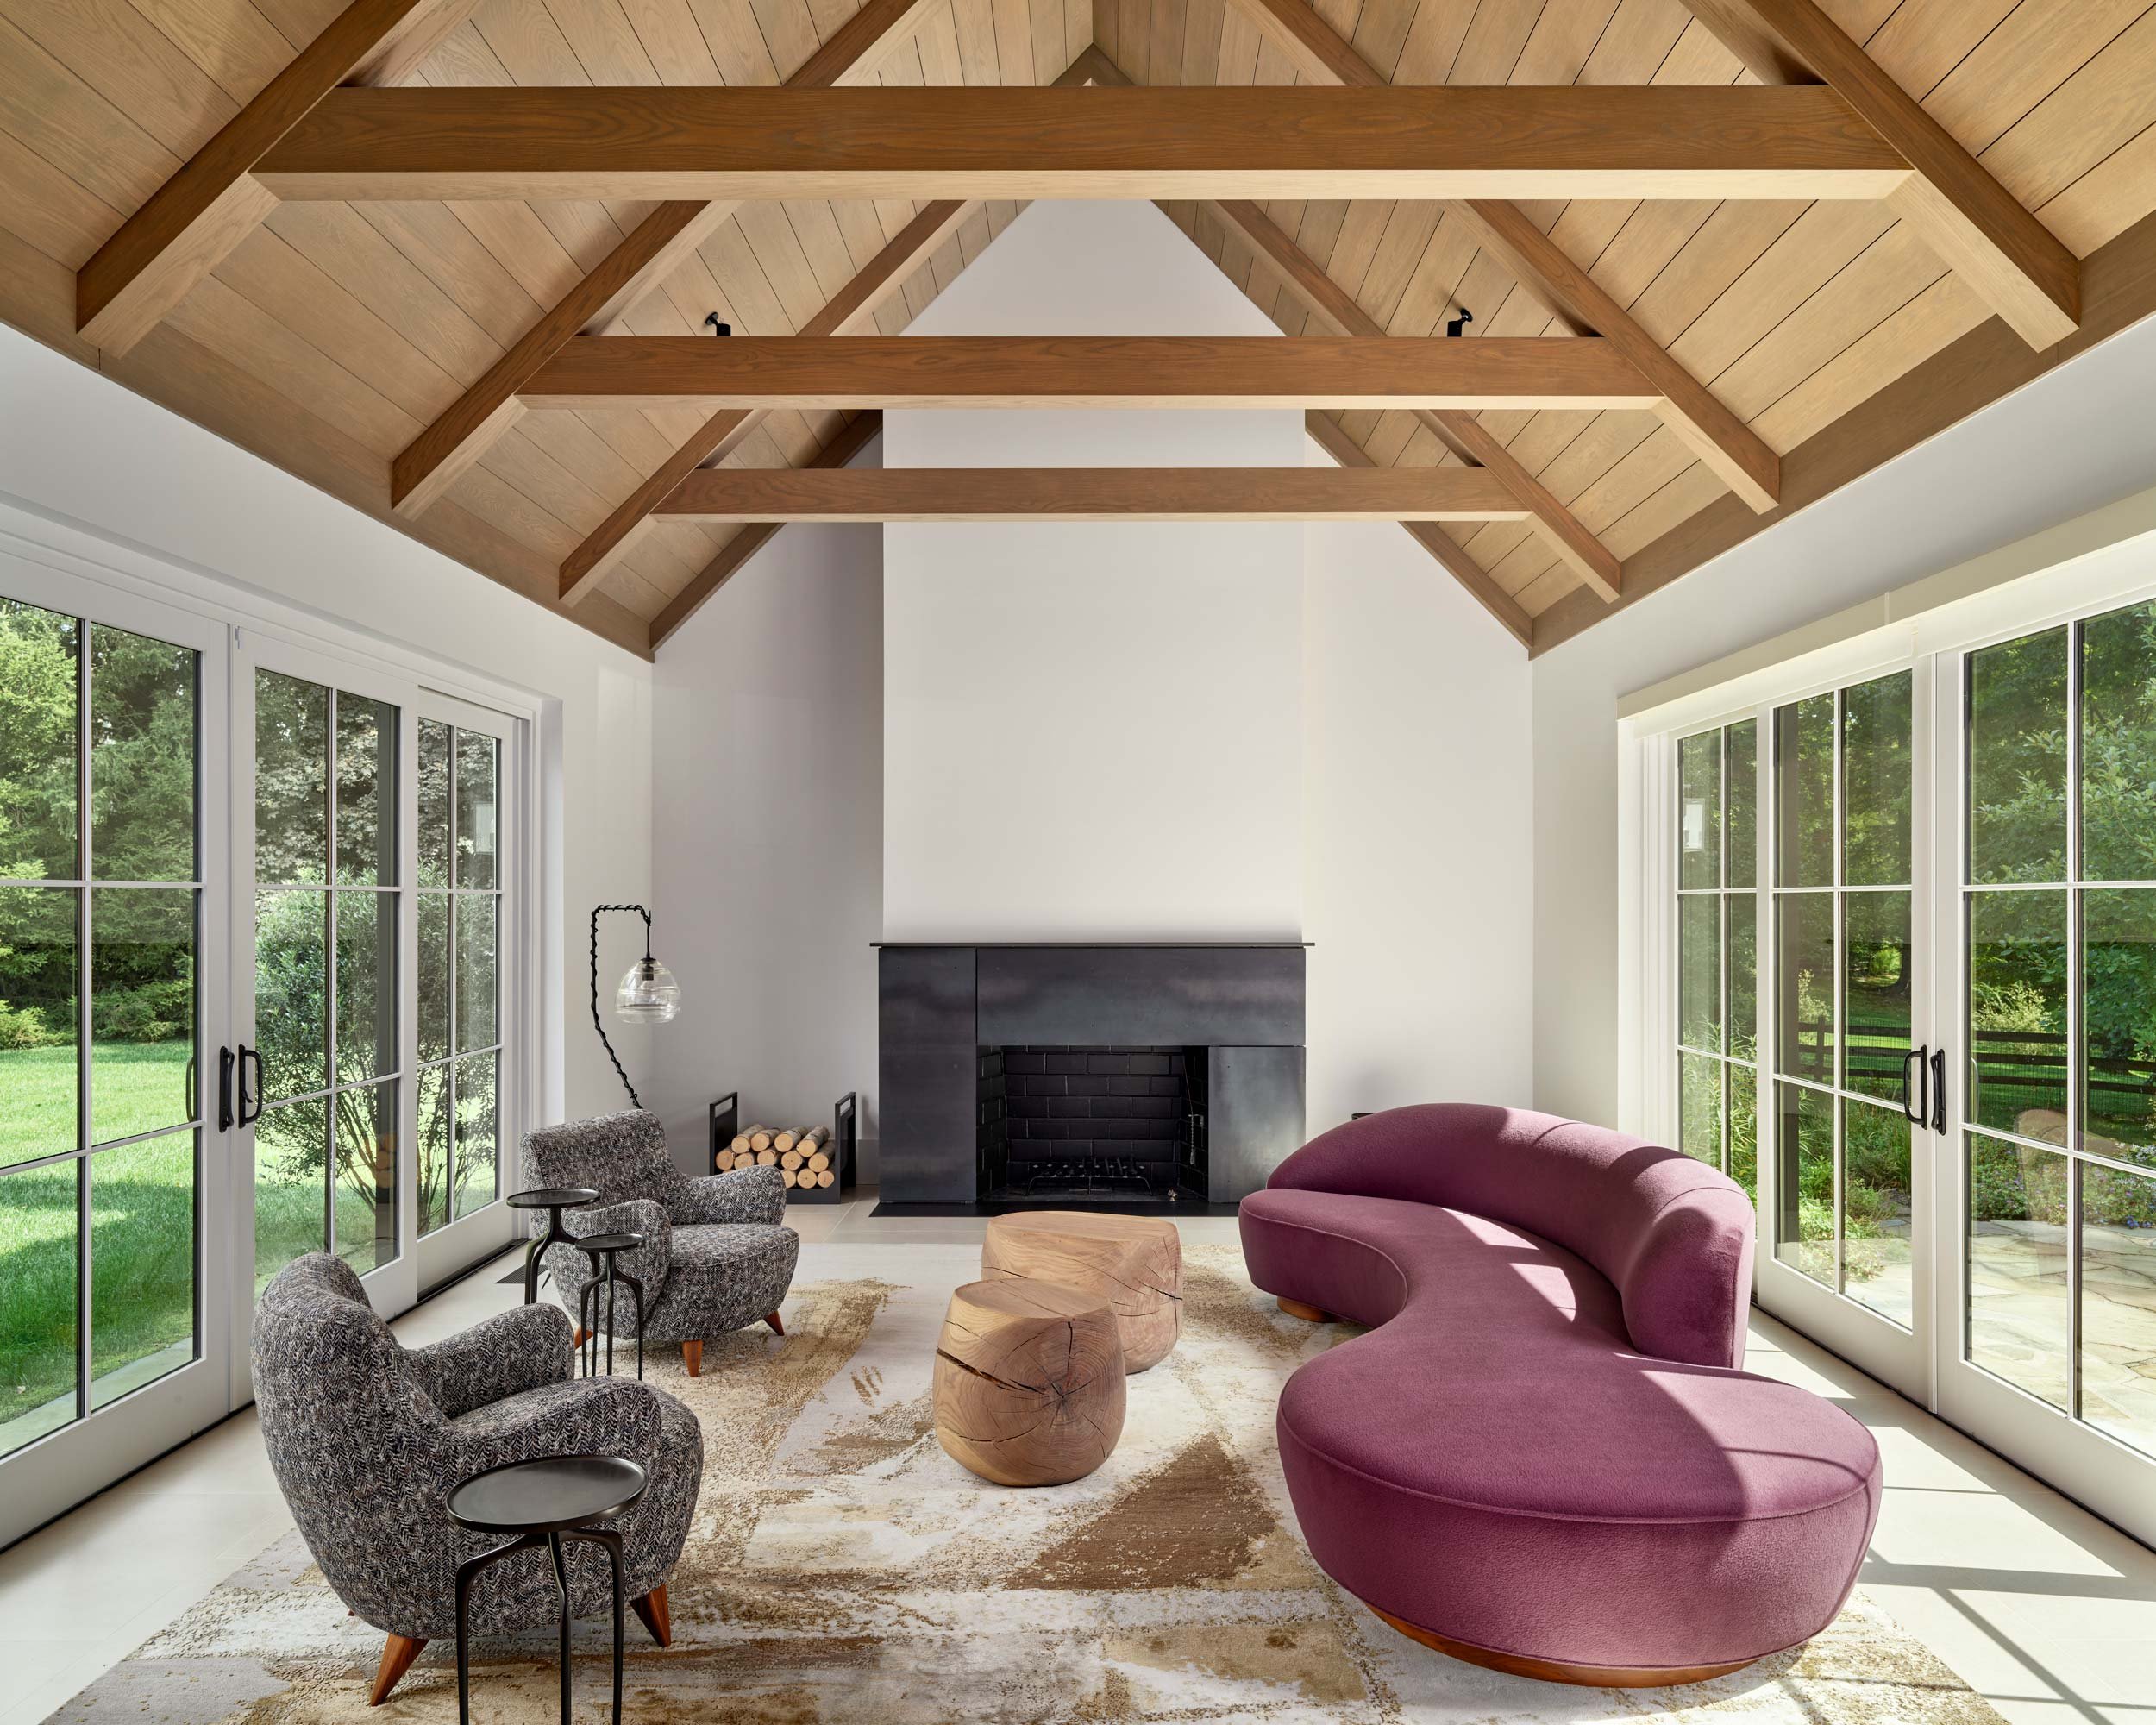  Private Residence MaMo Architects Villanova, PA See more in  Residential  